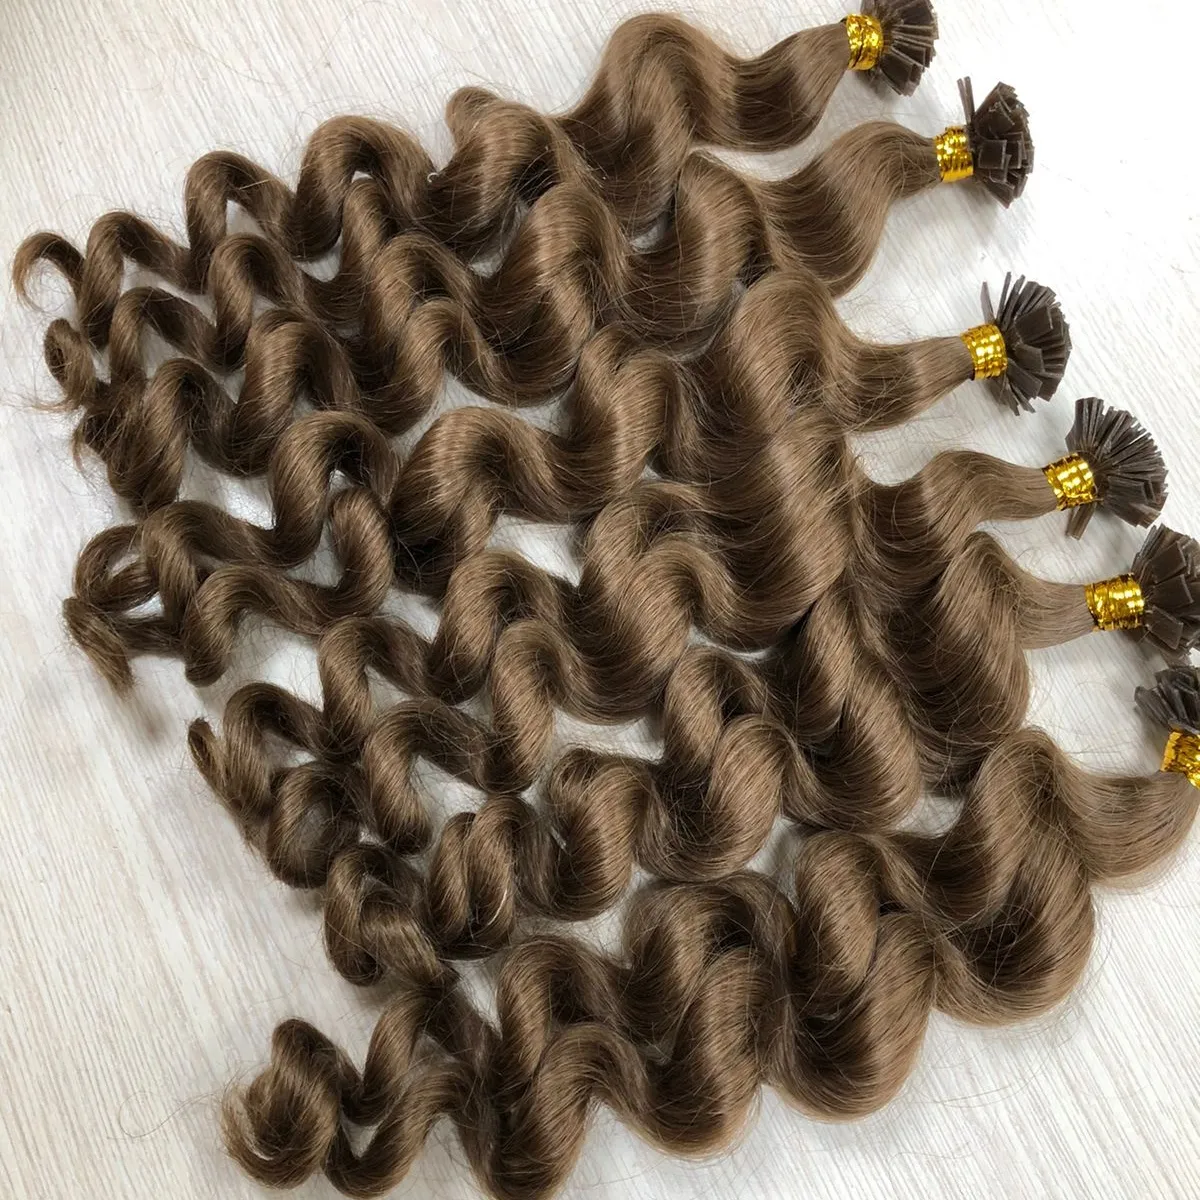 Human Hair Body Wave hair extensions Blonde Colors Weft Hair Extension